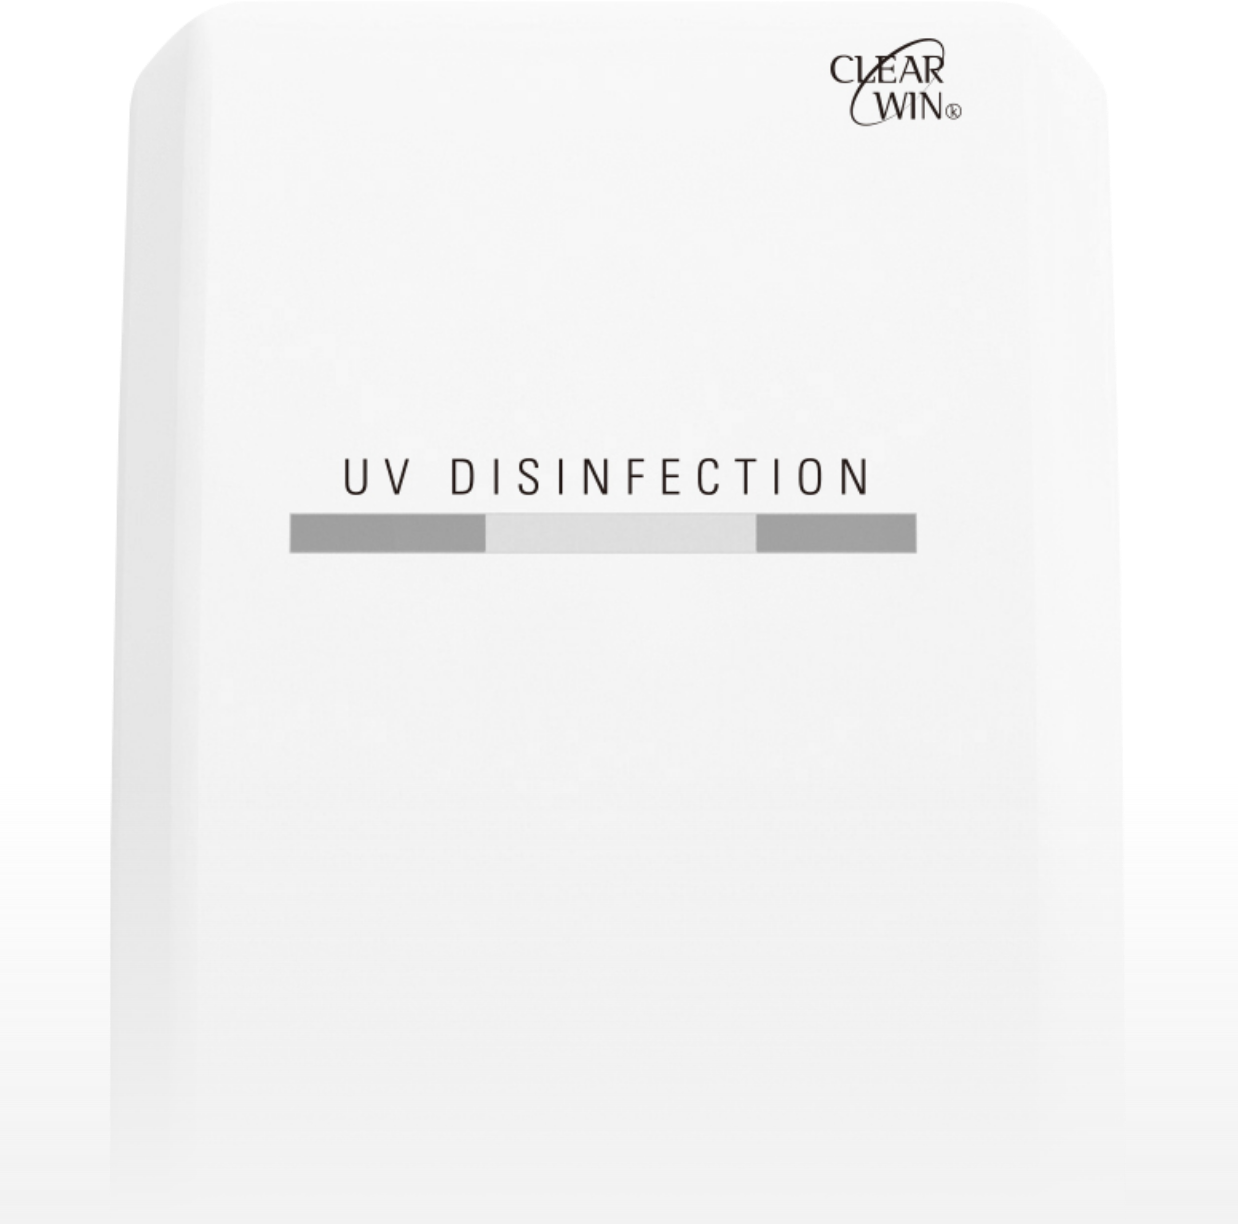 CLEARWIN UV DISINFECTION